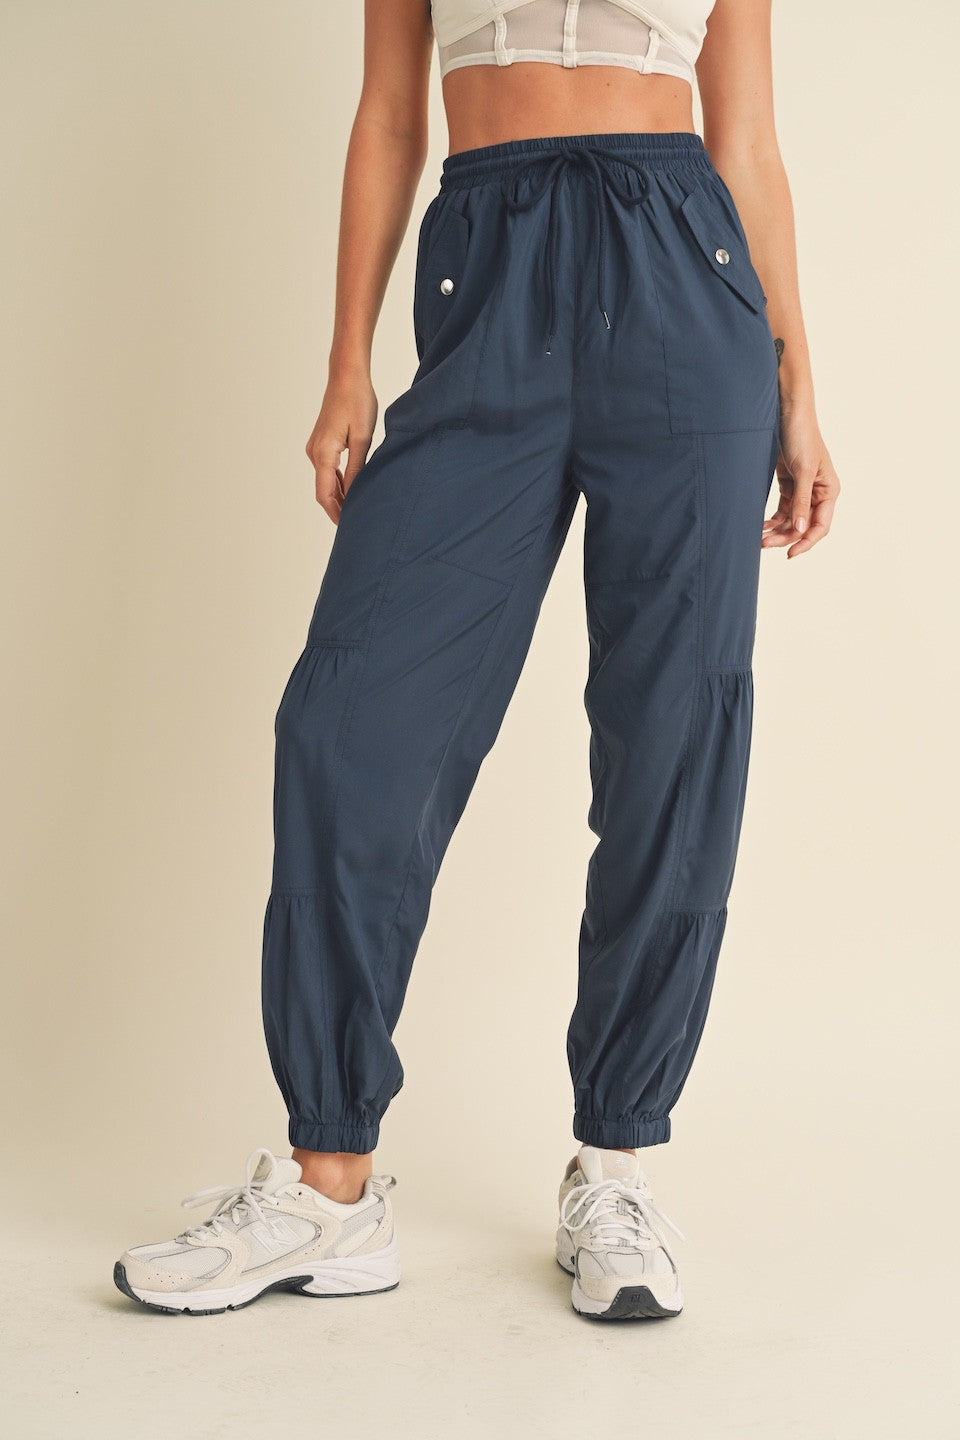 On-the-carGO Pants - Navy